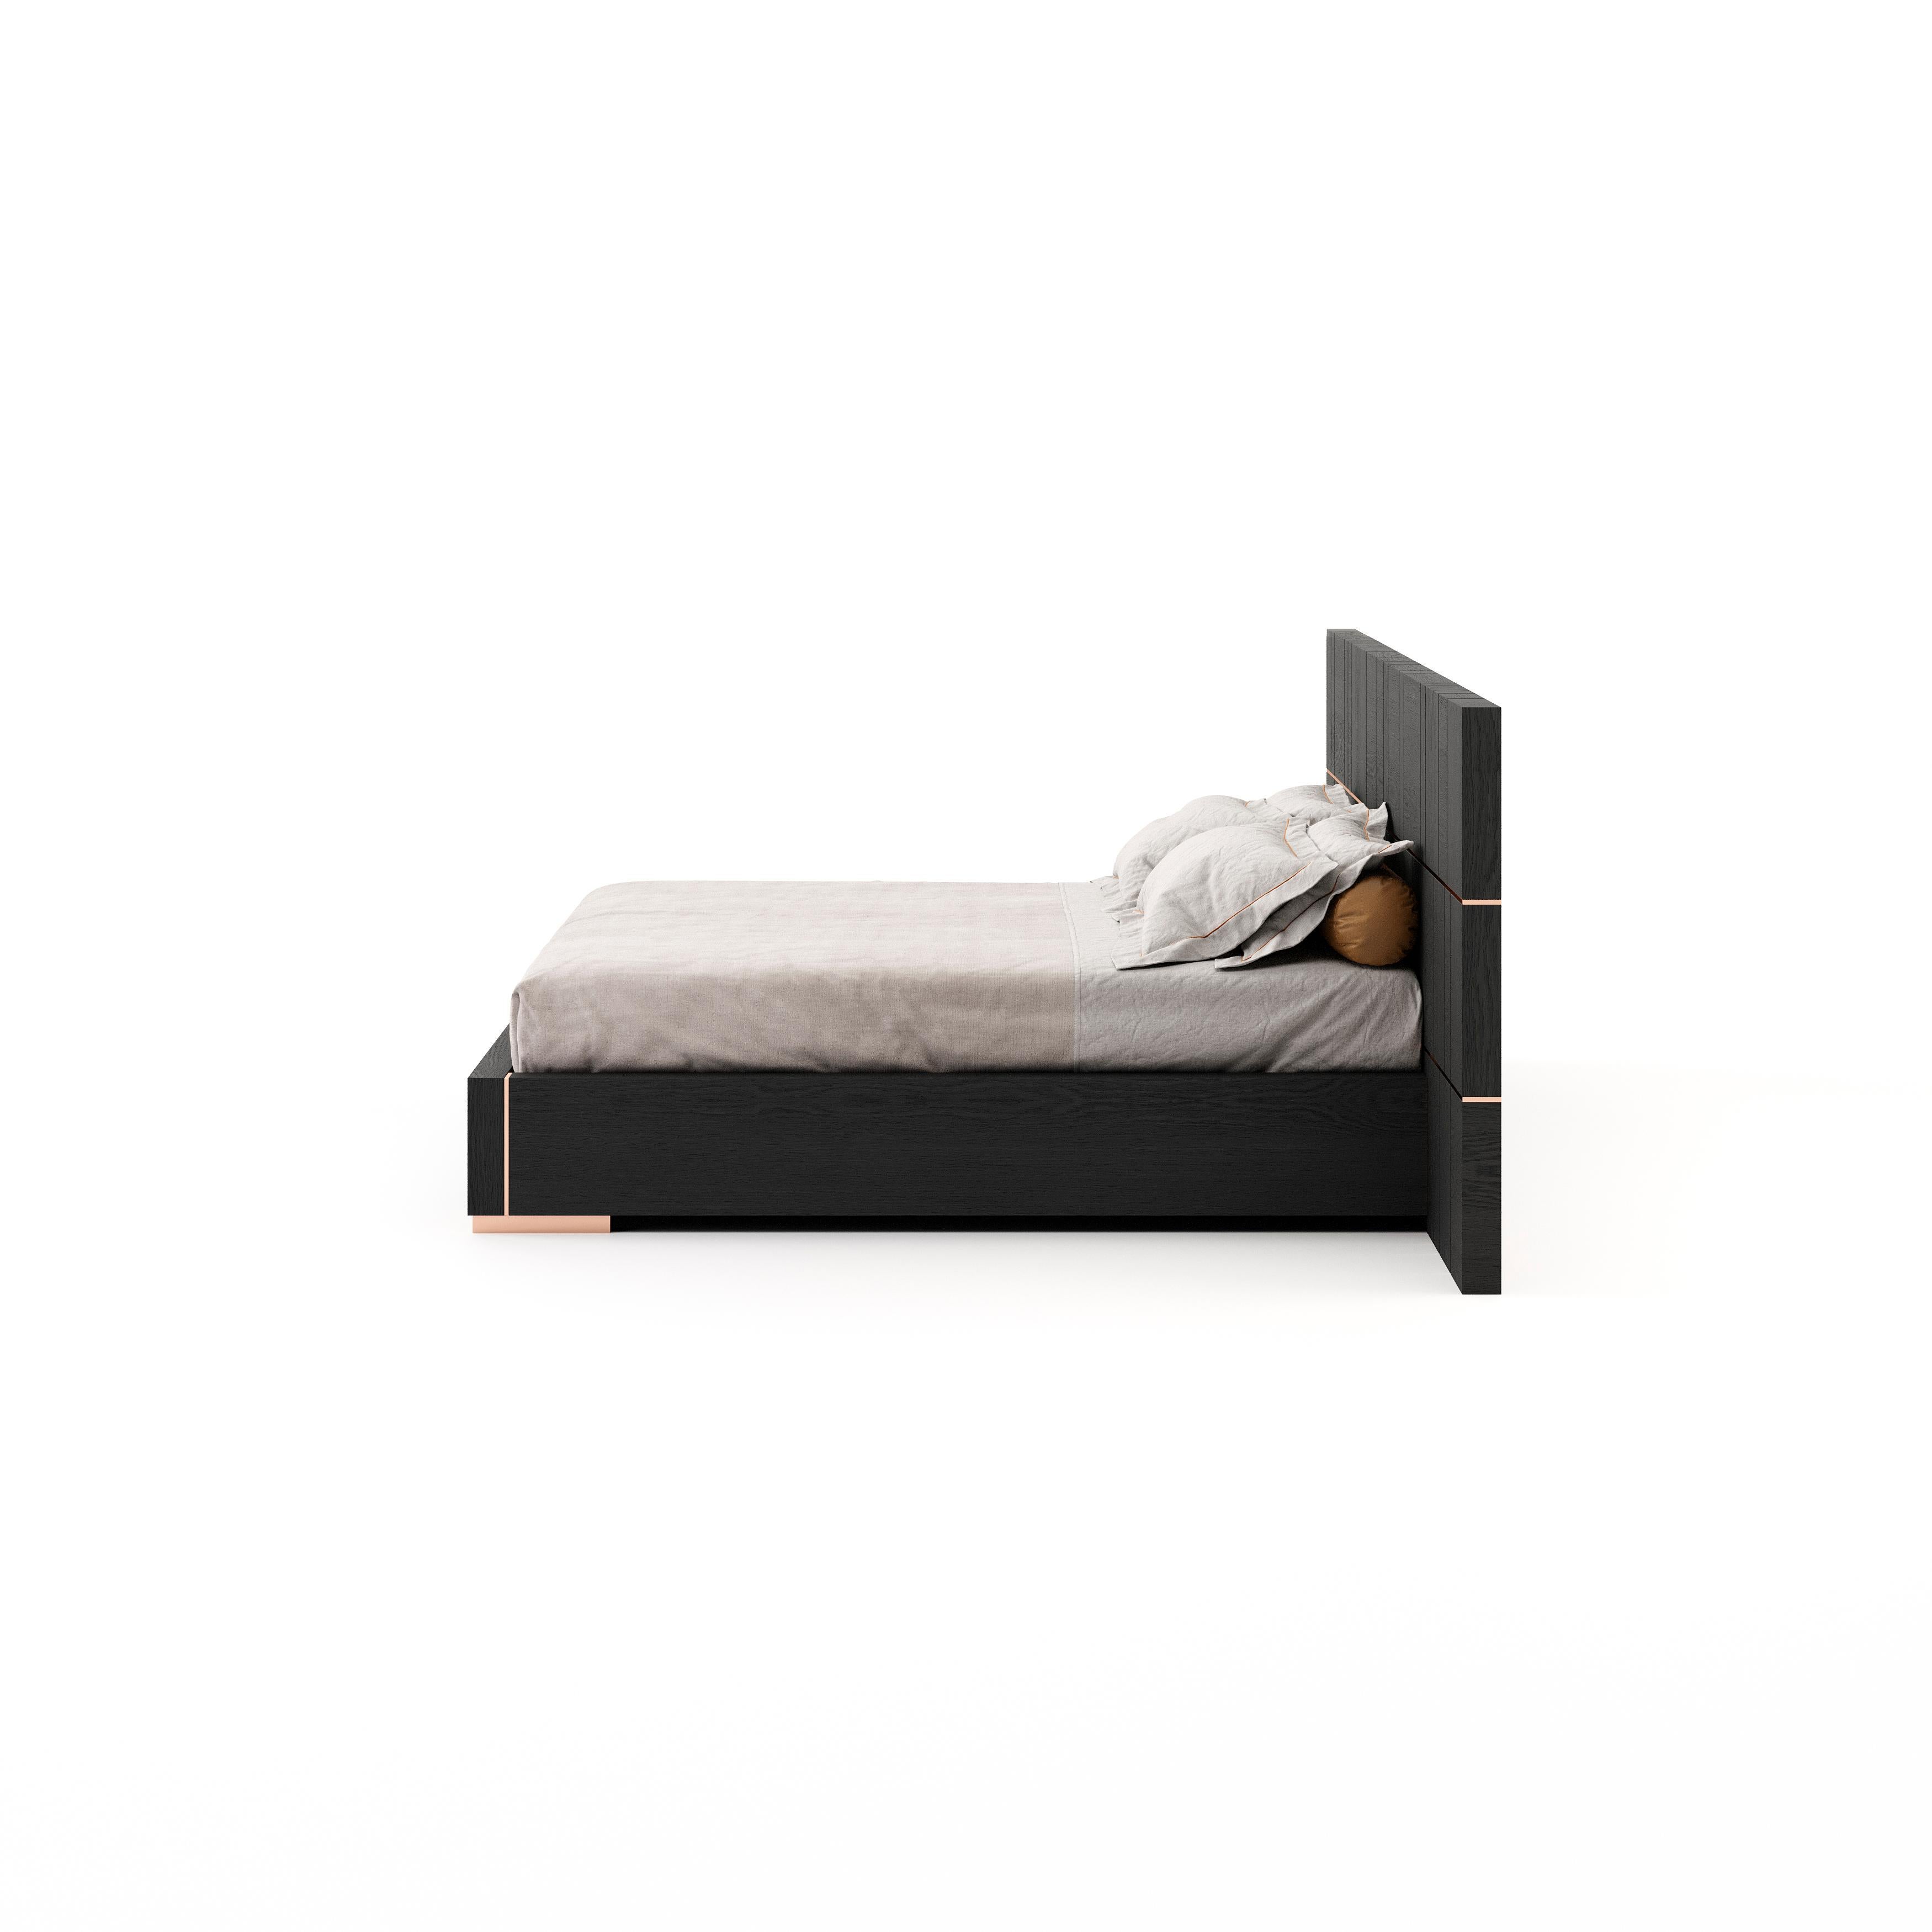 Portuguese 21st-century modern bed, with metal details customisable by Laskasas For Sale